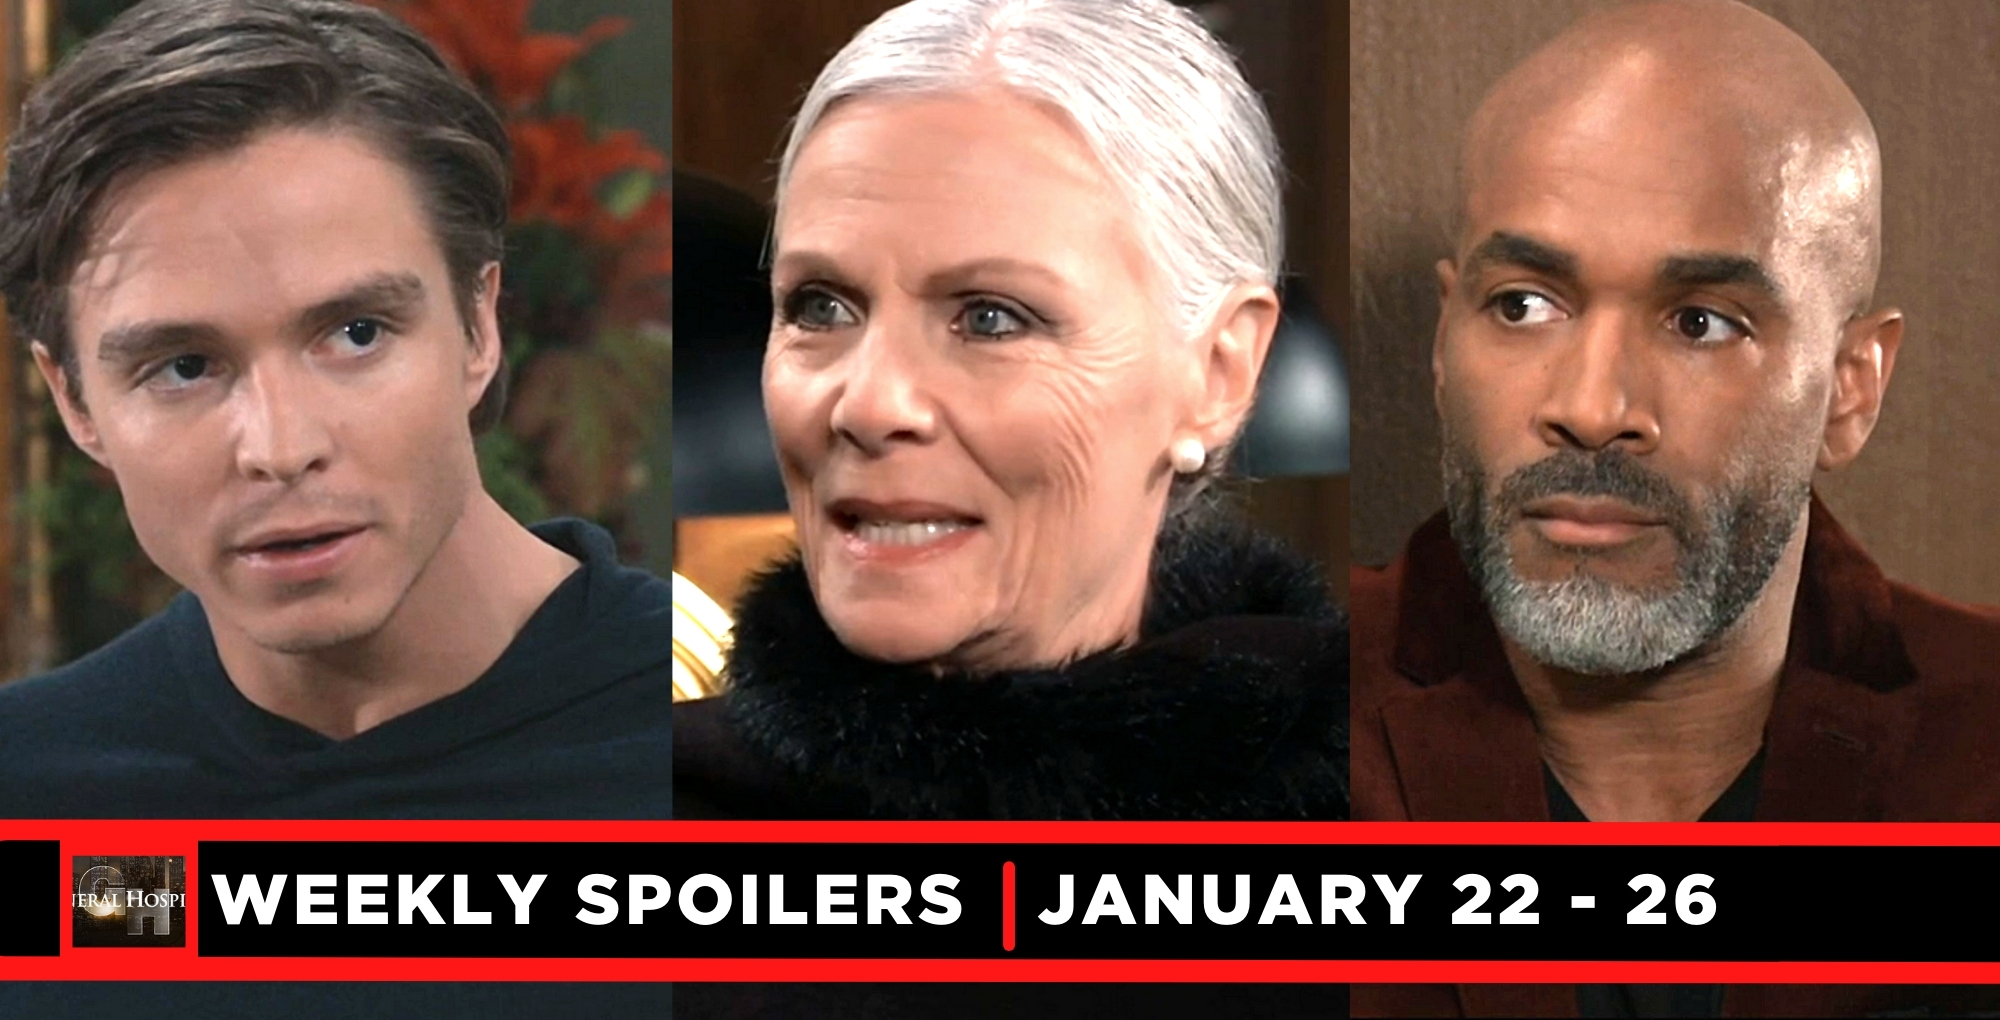 general hospital spoilers for the week of january 22-26, spencer, tracy, and curtis.